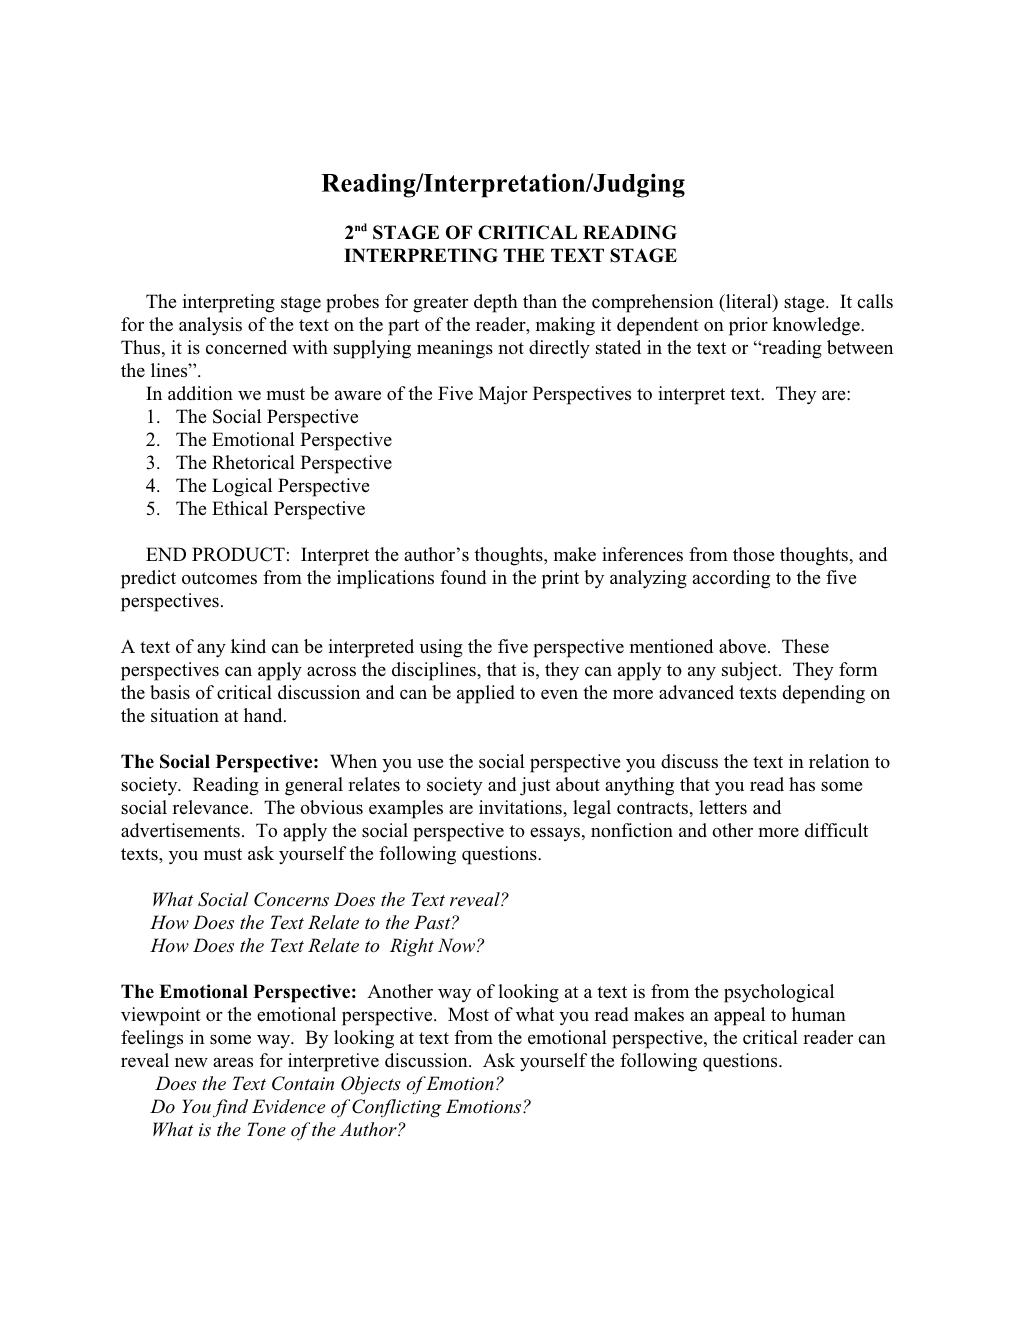 Interpreting the Text Stage